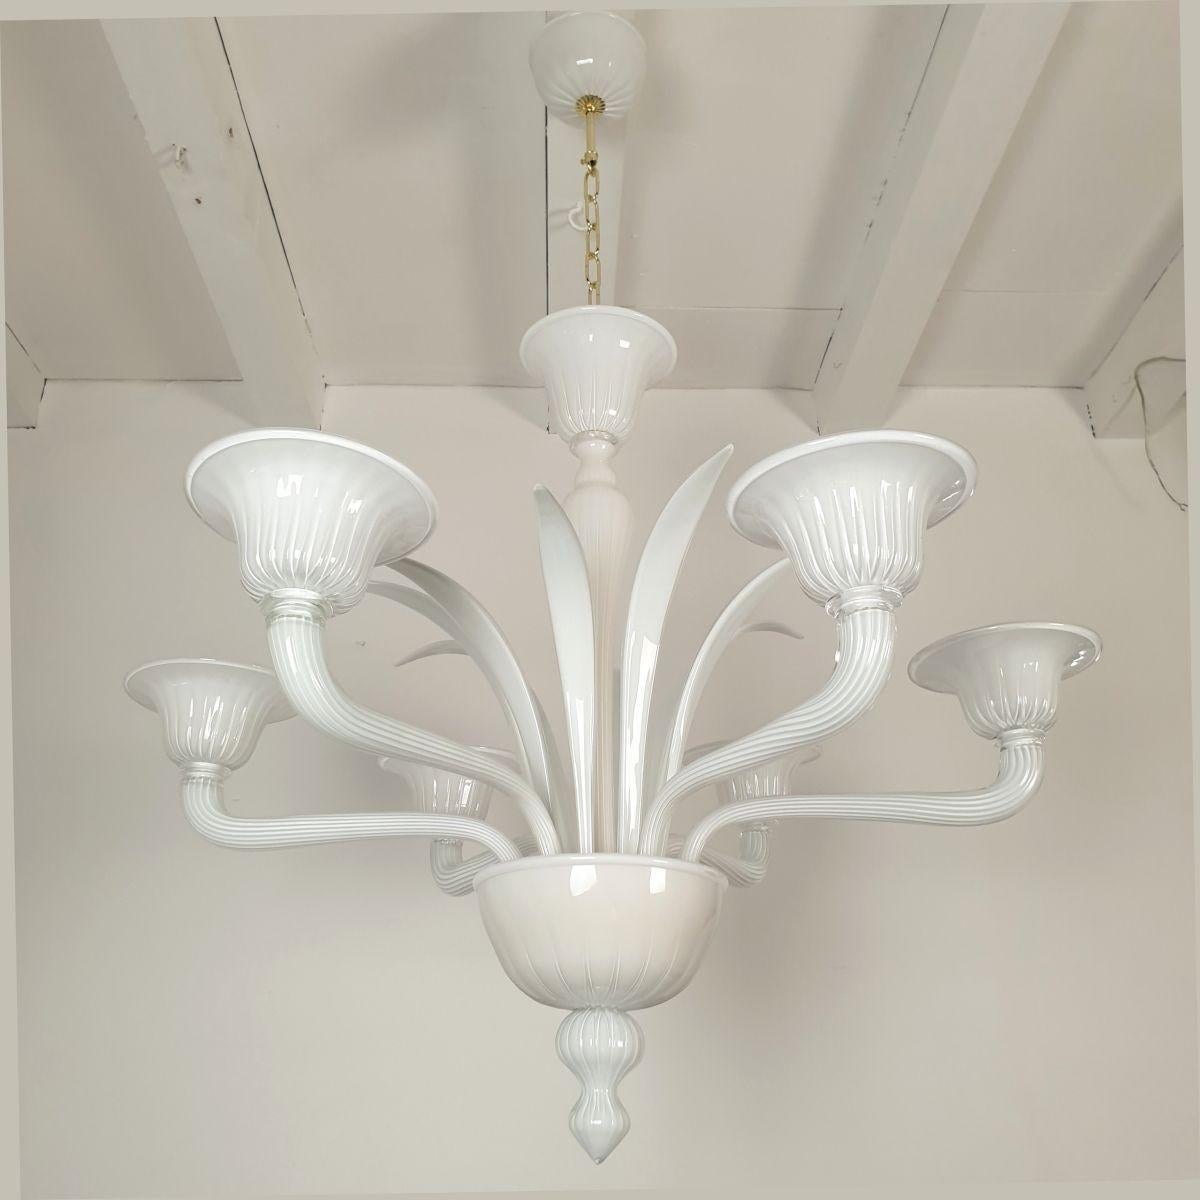 Large Mid Century Modern white Murano glass chandelier, attributed to Venini, Italy 1970s.
The neoclassical style chandelier is made of hand blown milk white Murano glass.
You can see a transparent layer of glass over the white color, which gives a